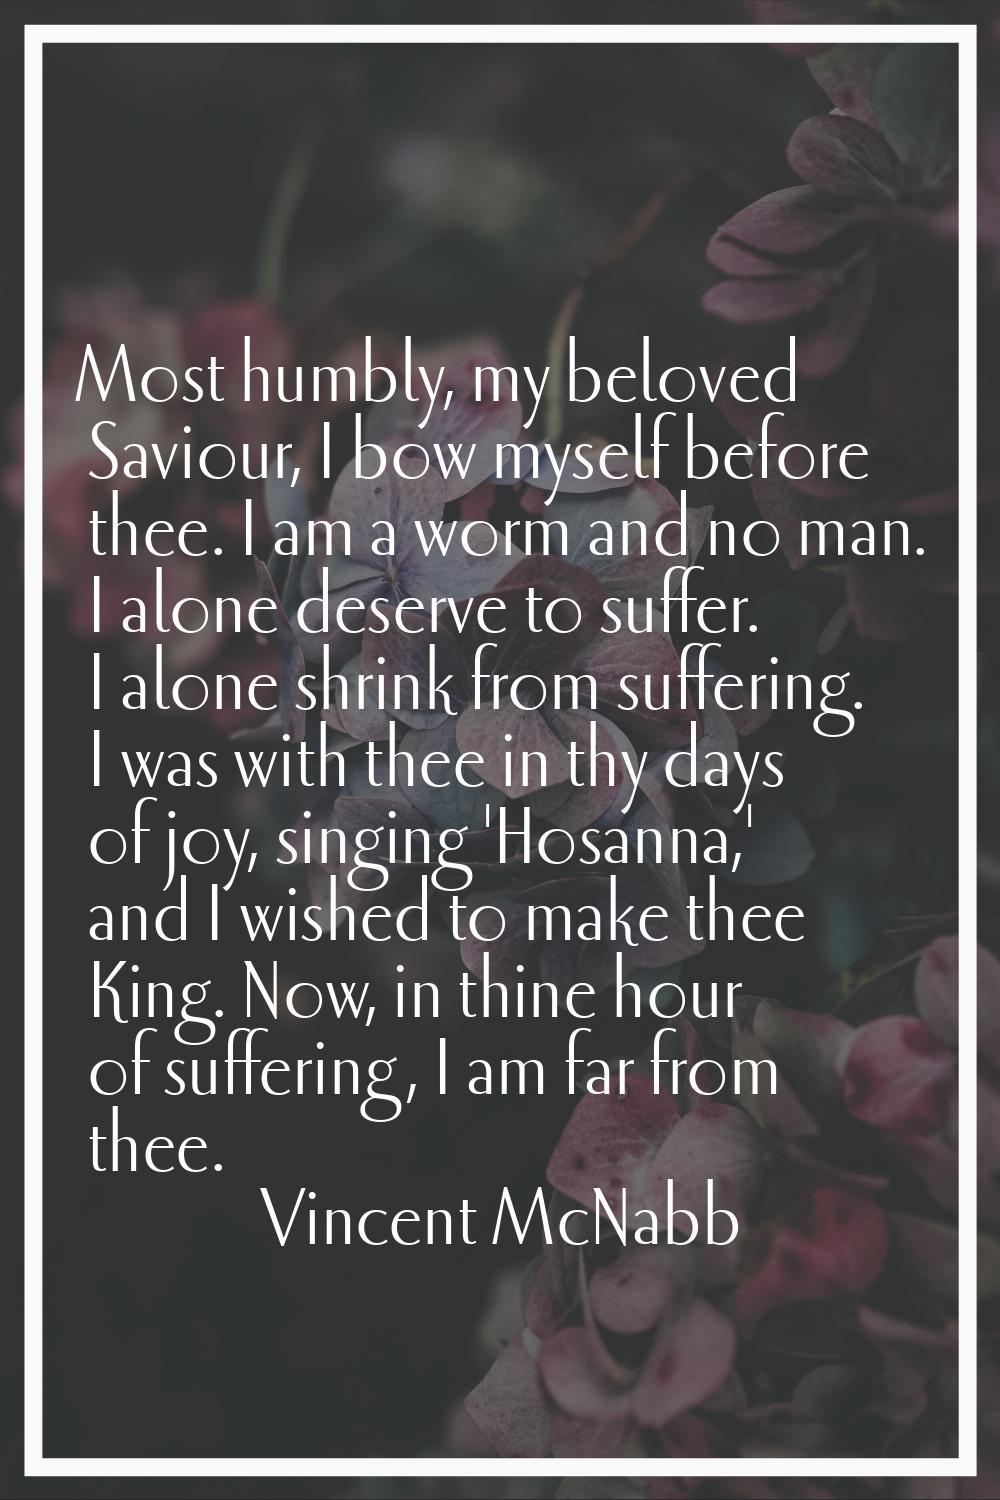 Most humbly, my beloved Saviour, I bow myself before thee. I am a worm and no man. I alone deserve 